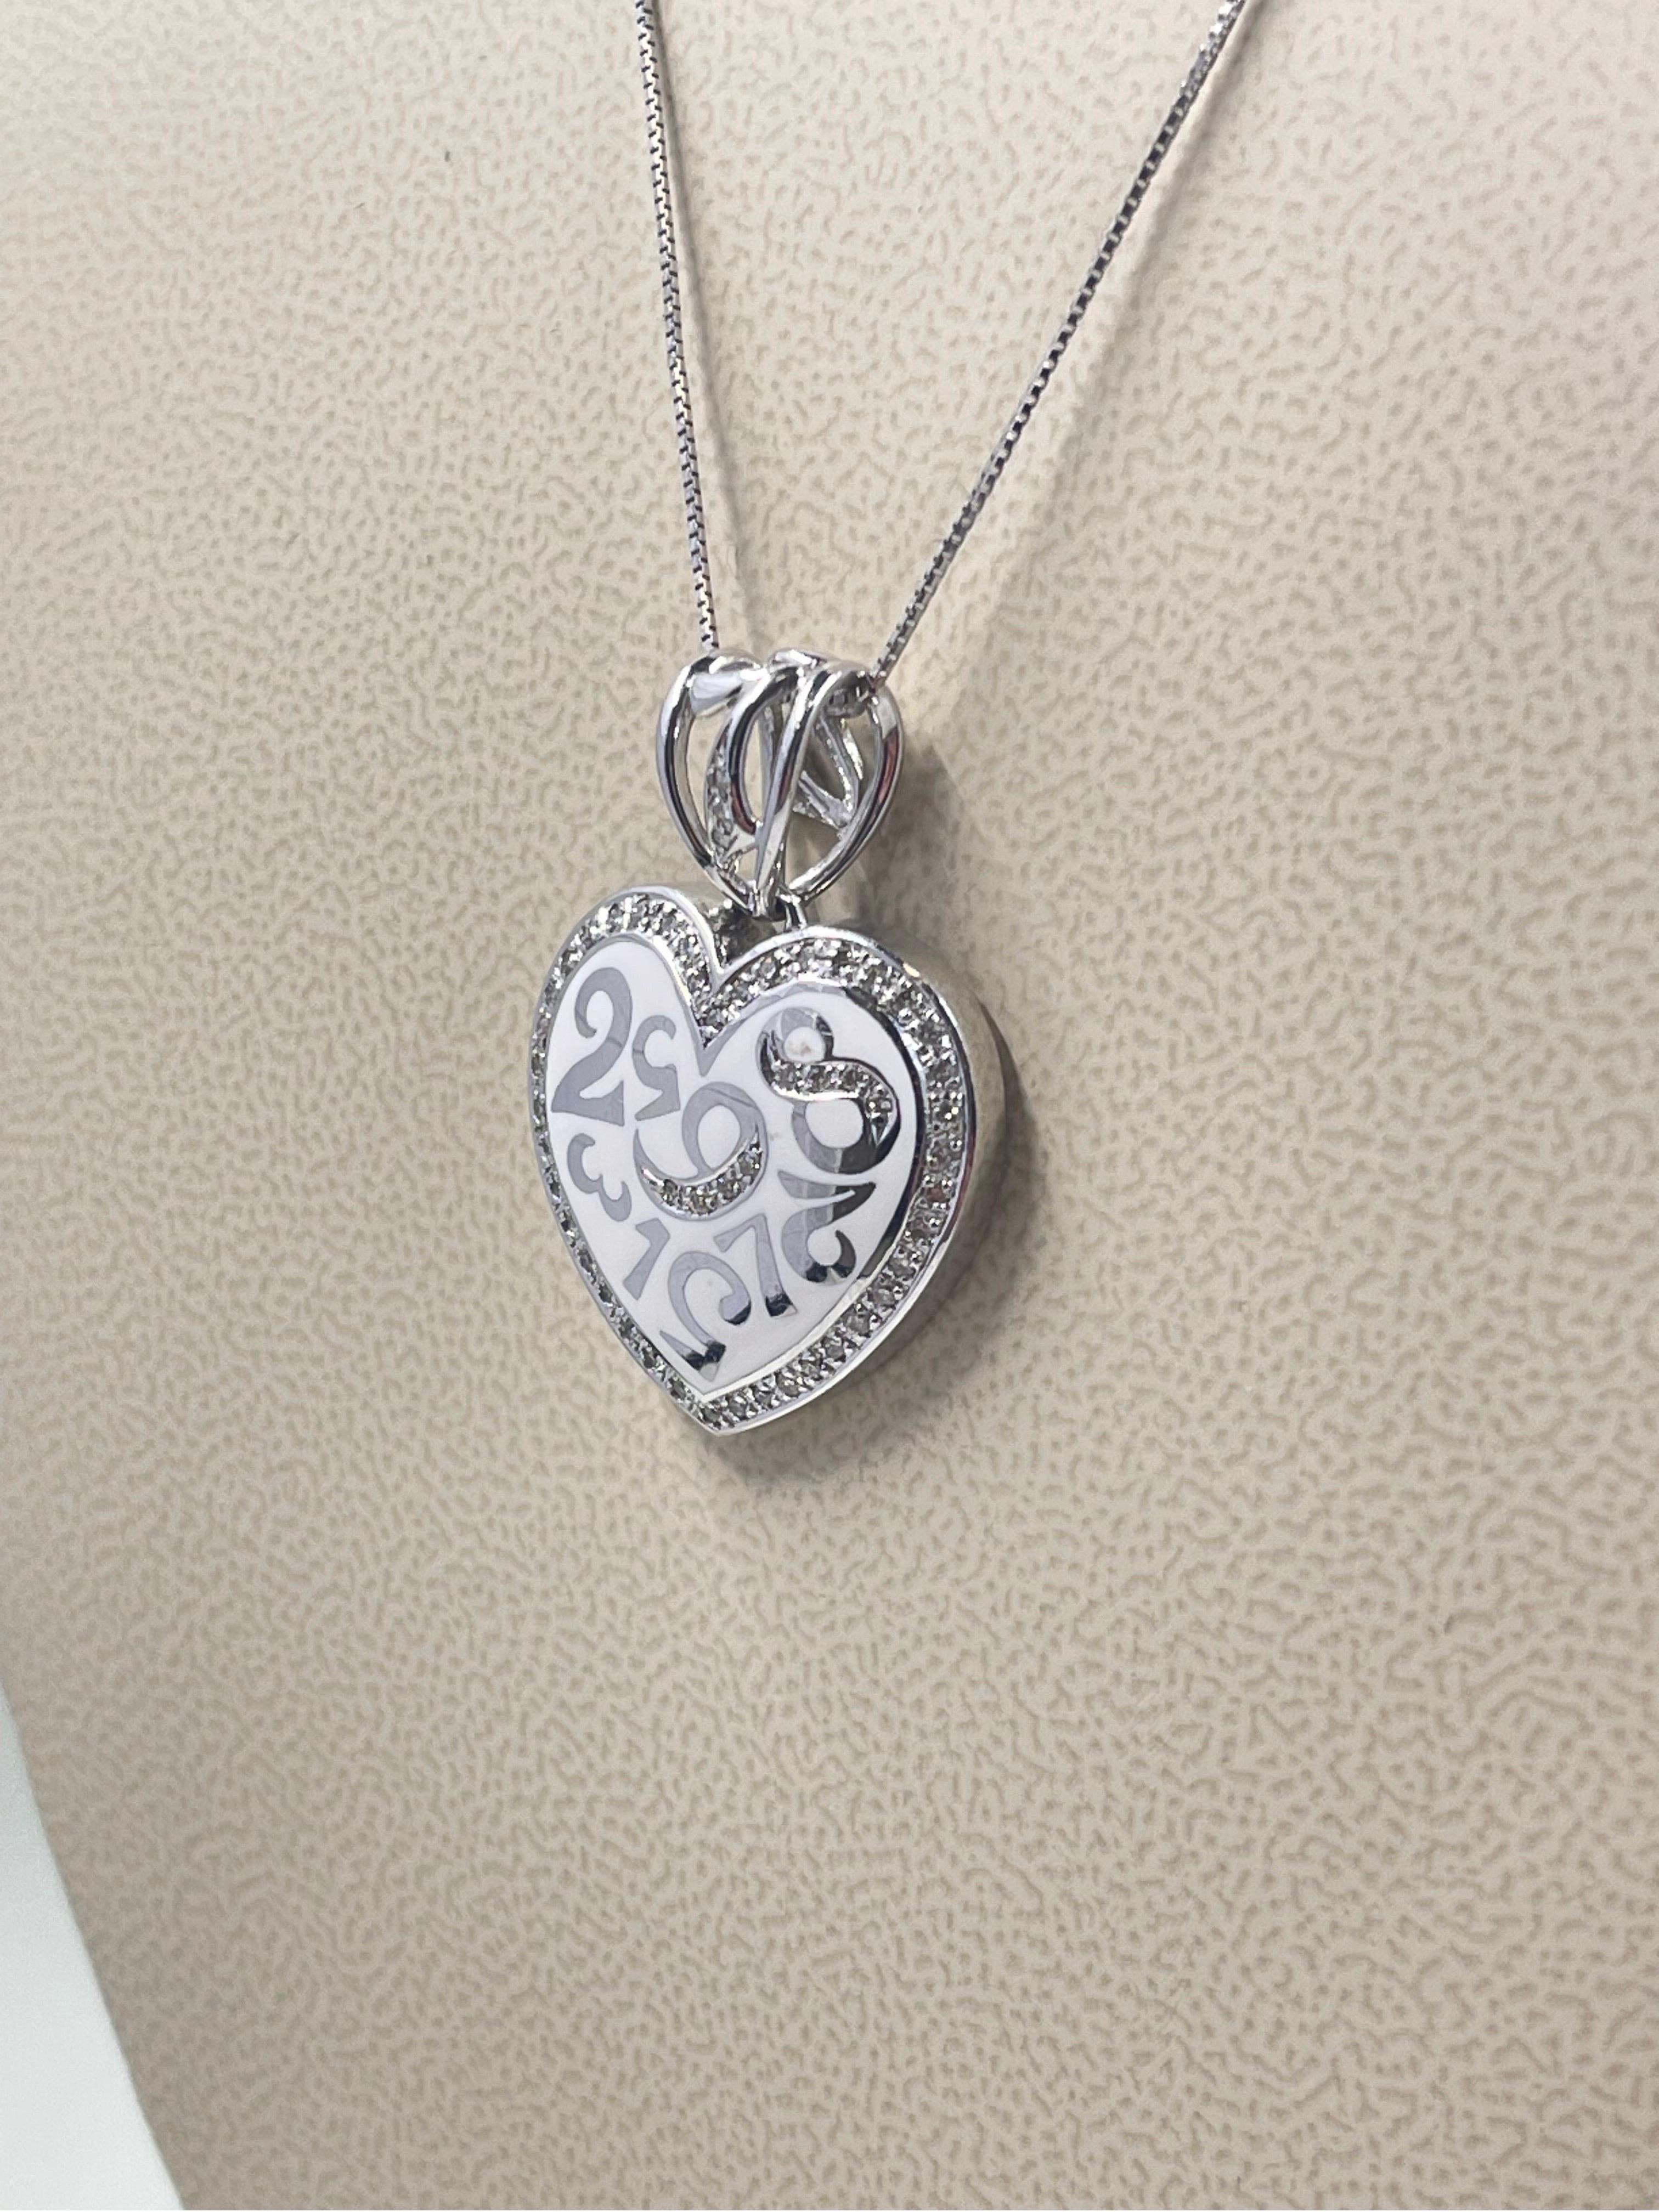 Diamond And White Enamel Heart Necklace In 18k White Gold.

0.38 carats in diamonds,

Length is 18”.